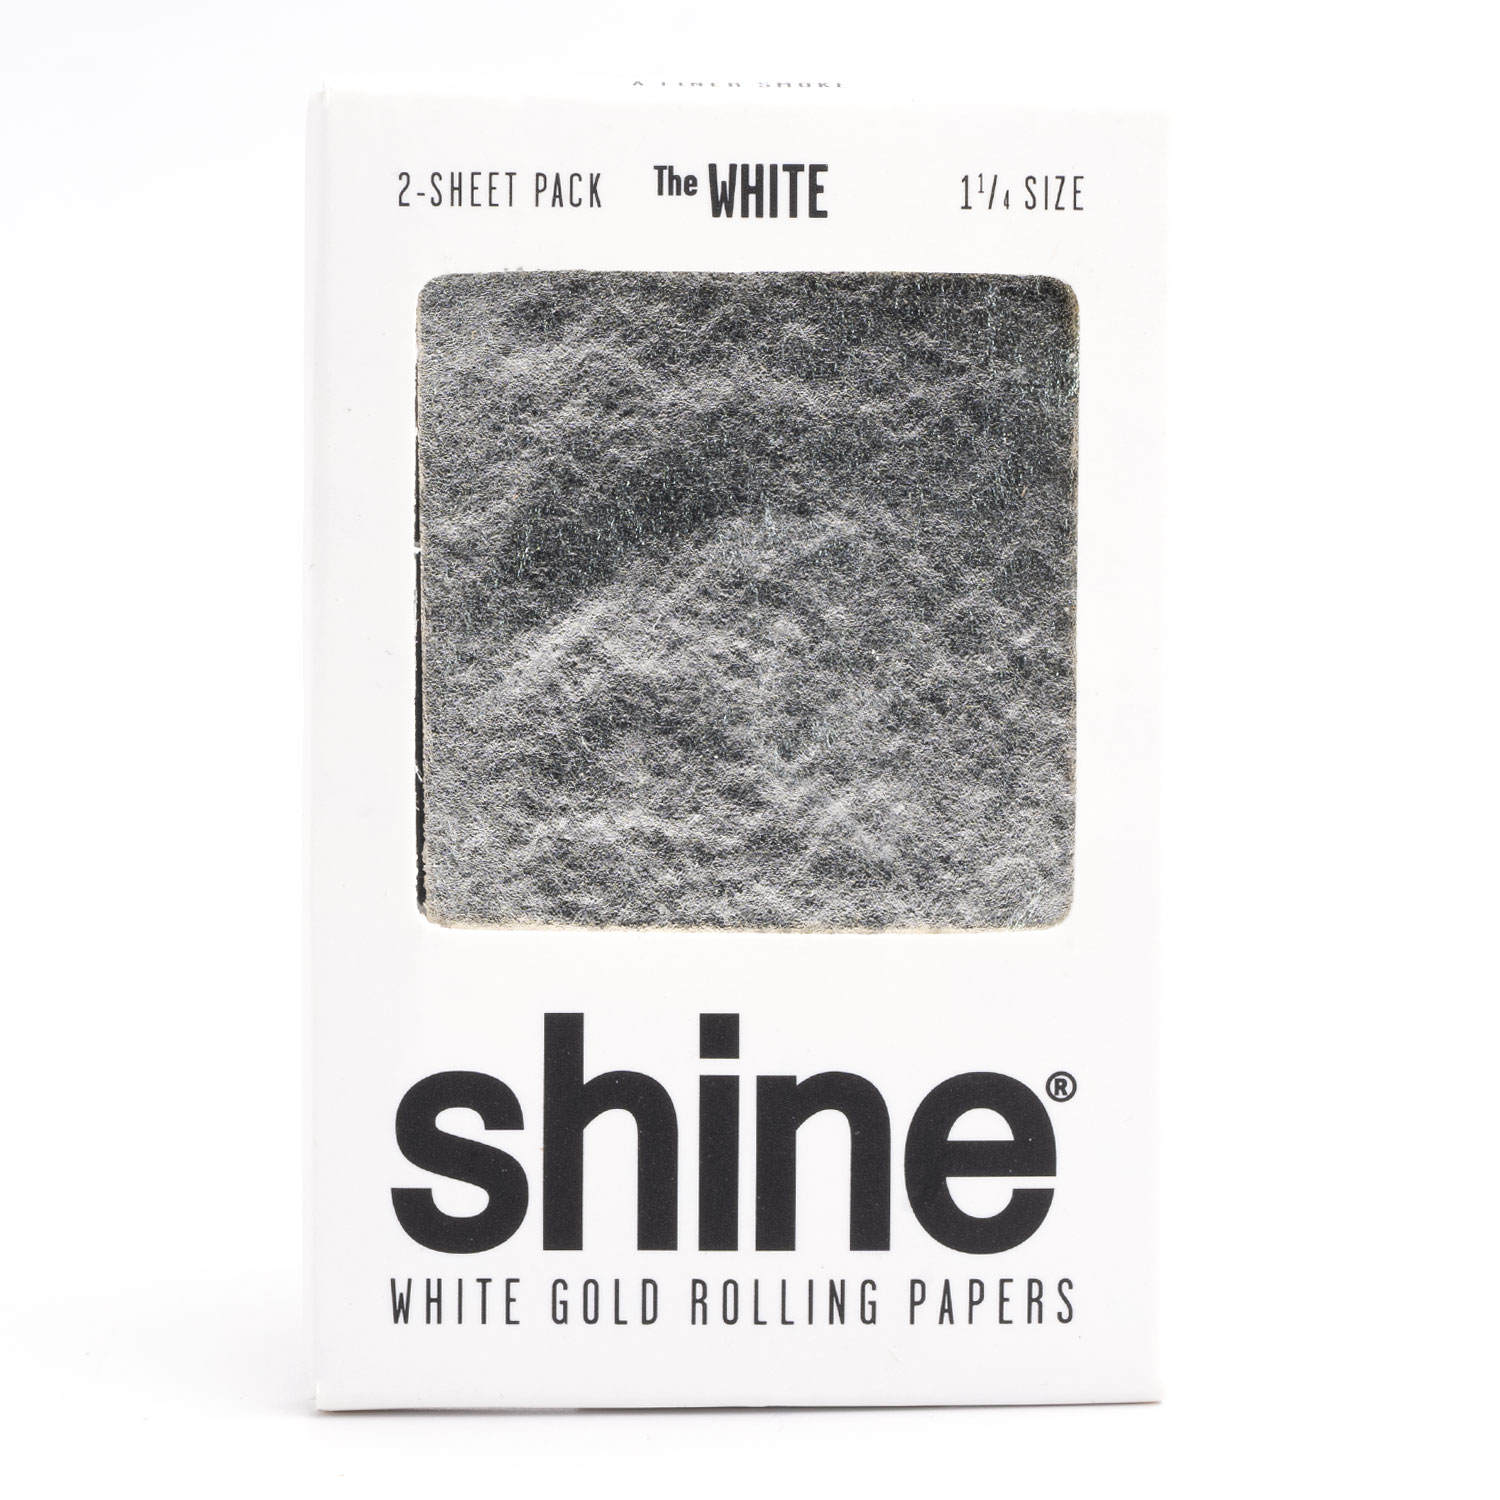 Shine White Gold Rolling Papers